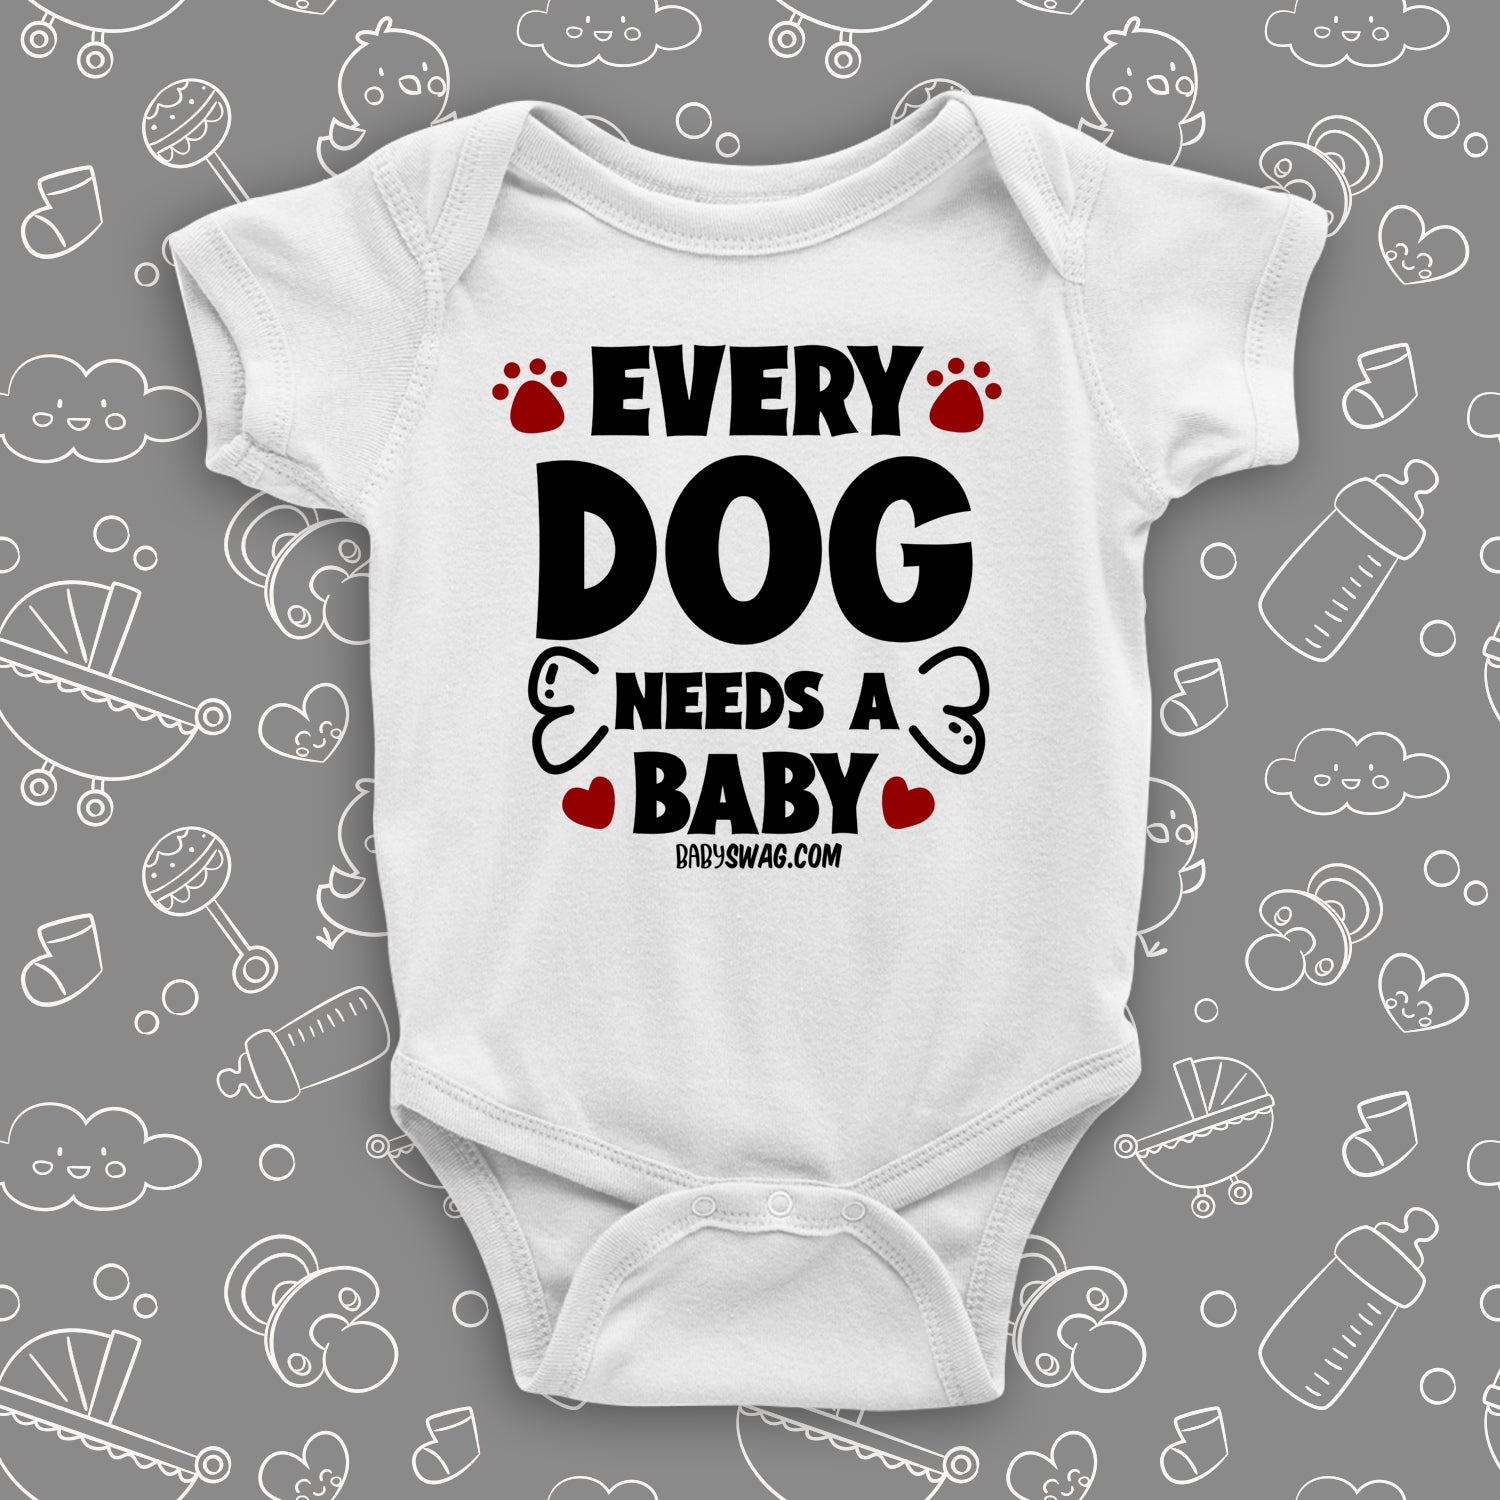 White cute baby onesie saying "Every dog needs a baby", red paws and bone also printed.